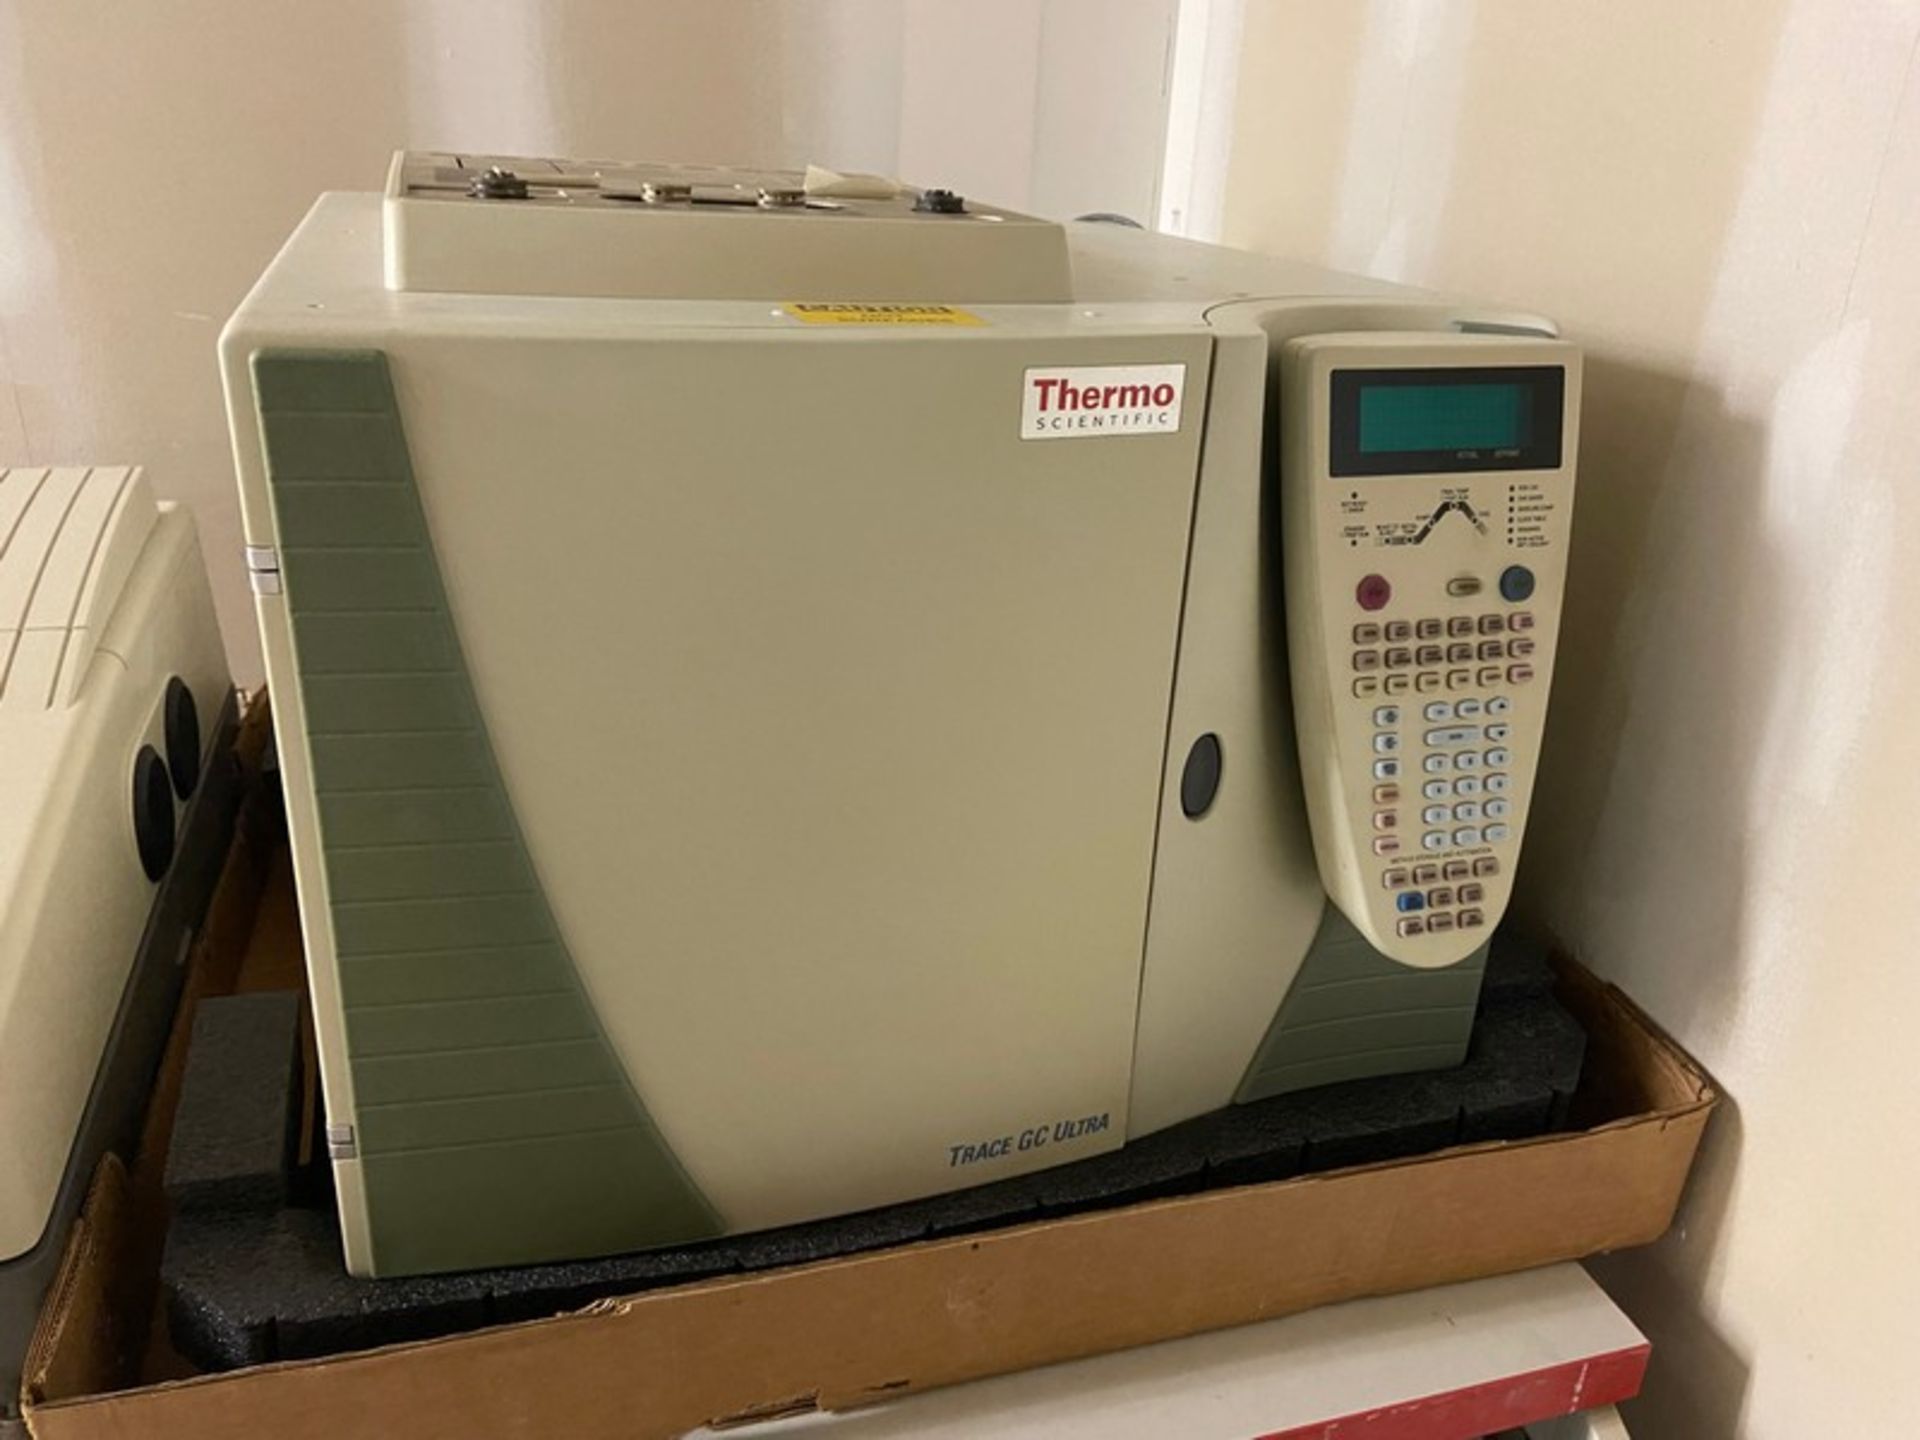 Thermo Scientific Mult-Channel Gas Chromatograph, M/N TRACE GC ULTRA, S/N 320080639 (LOCATED IN-